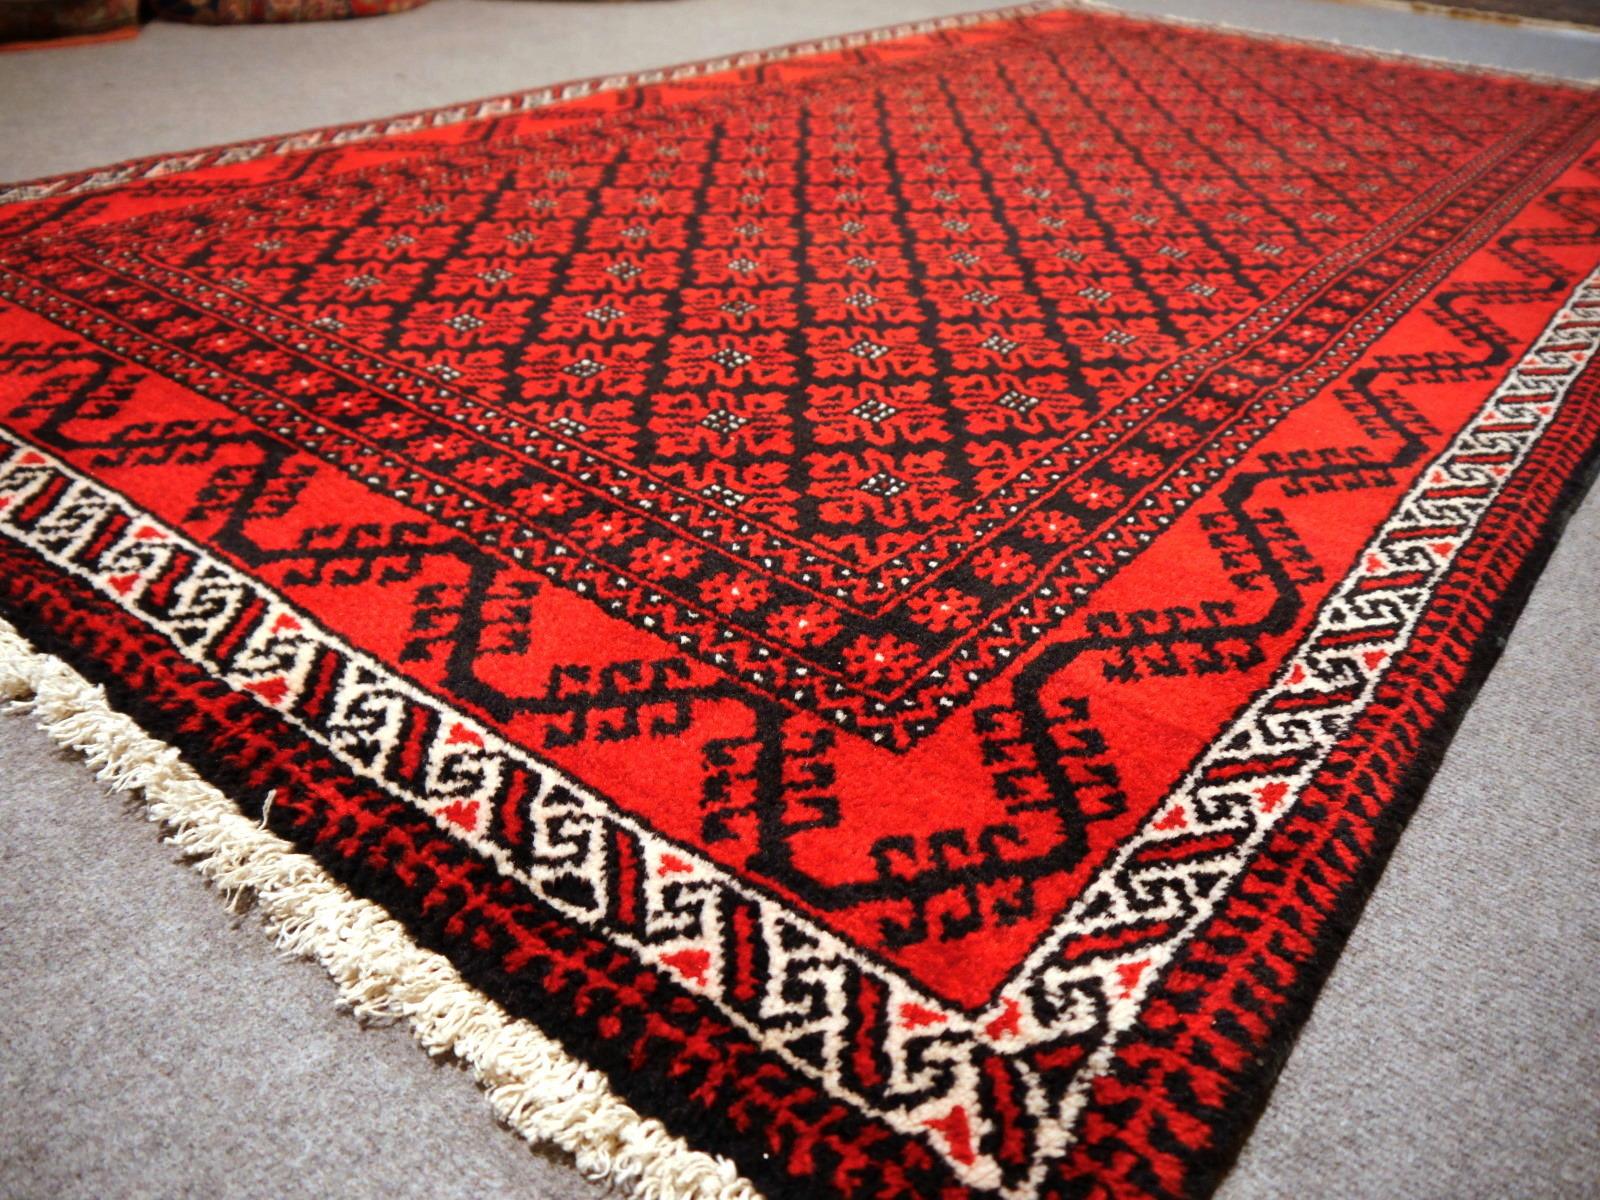 Tribal Red Ersari Rug Hallway Stairway Runner Vintage Bokhara Hand Knotted Semi Antique For Sale